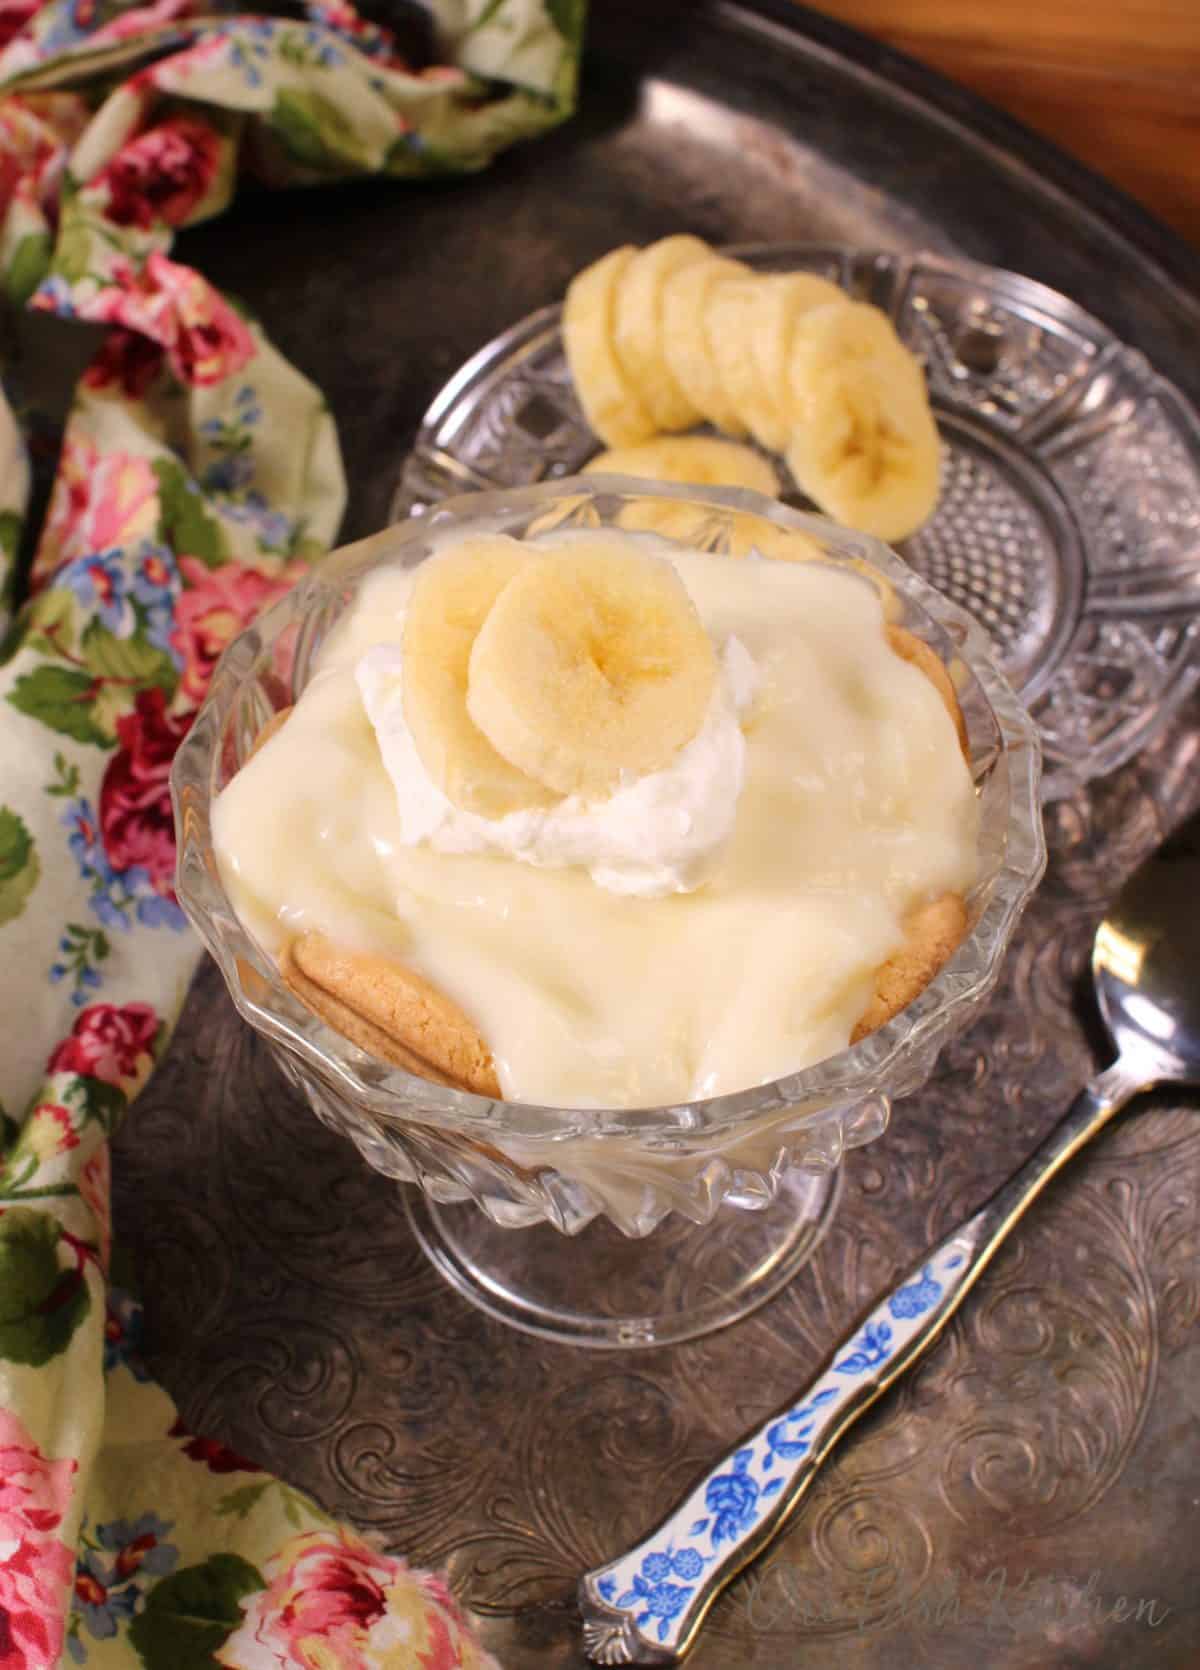 Banana cream pie in a dessert glass topped with whipped cream and sliced bananas on a metal tray with a floral cloth napkin, a small plate of sliced bananas, and a spoon